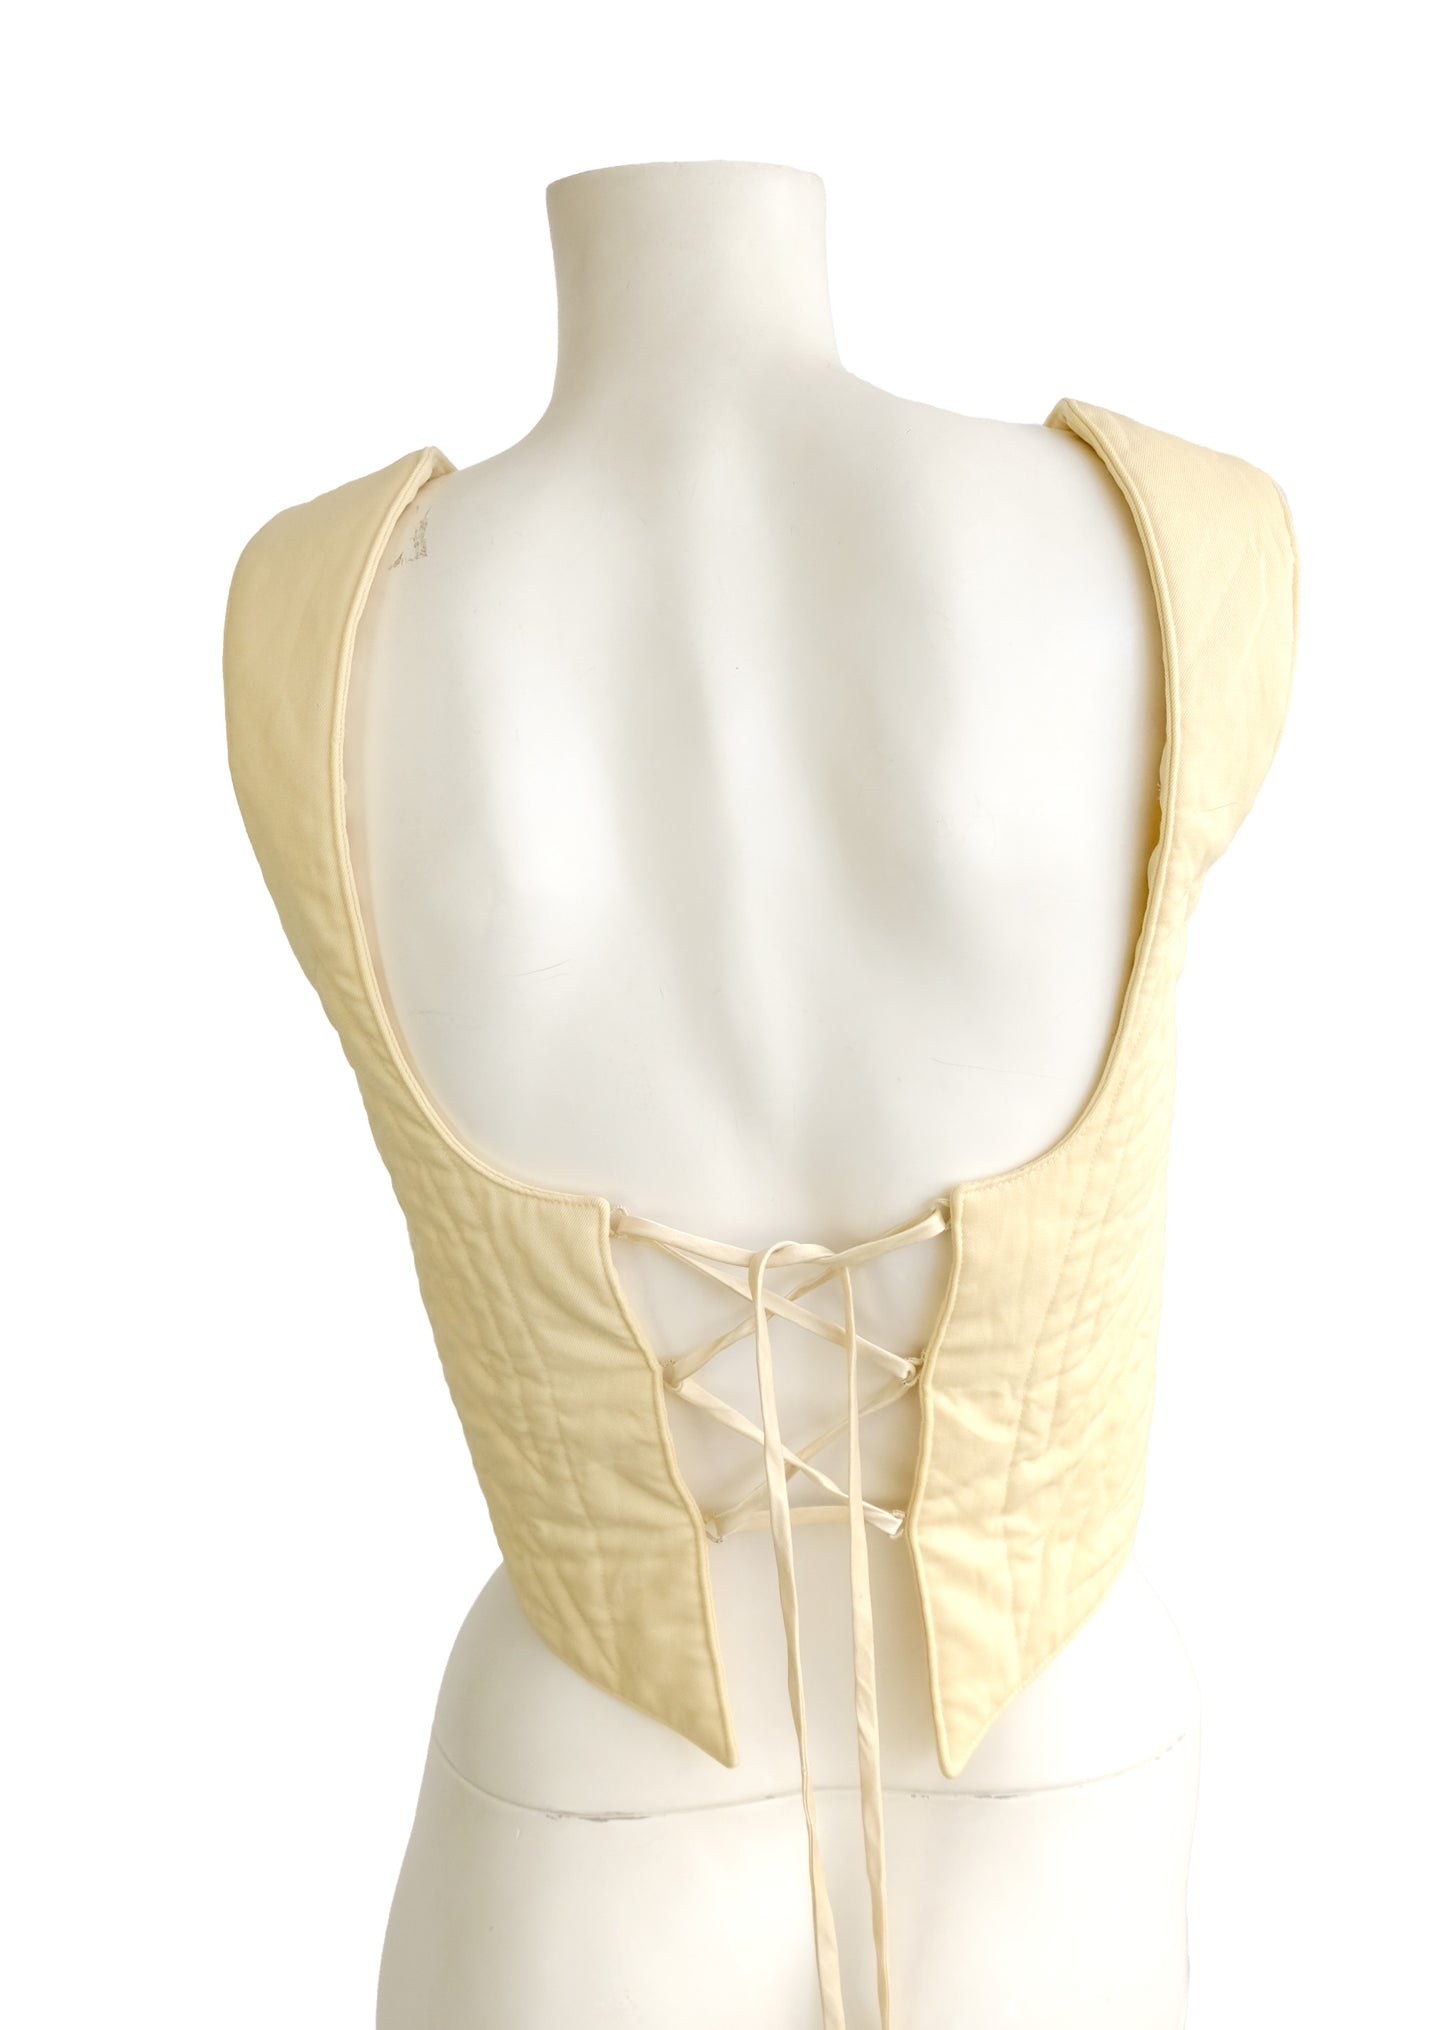 John Galliano London Vintage Lace-up Quilted "Fencing" Corset, S